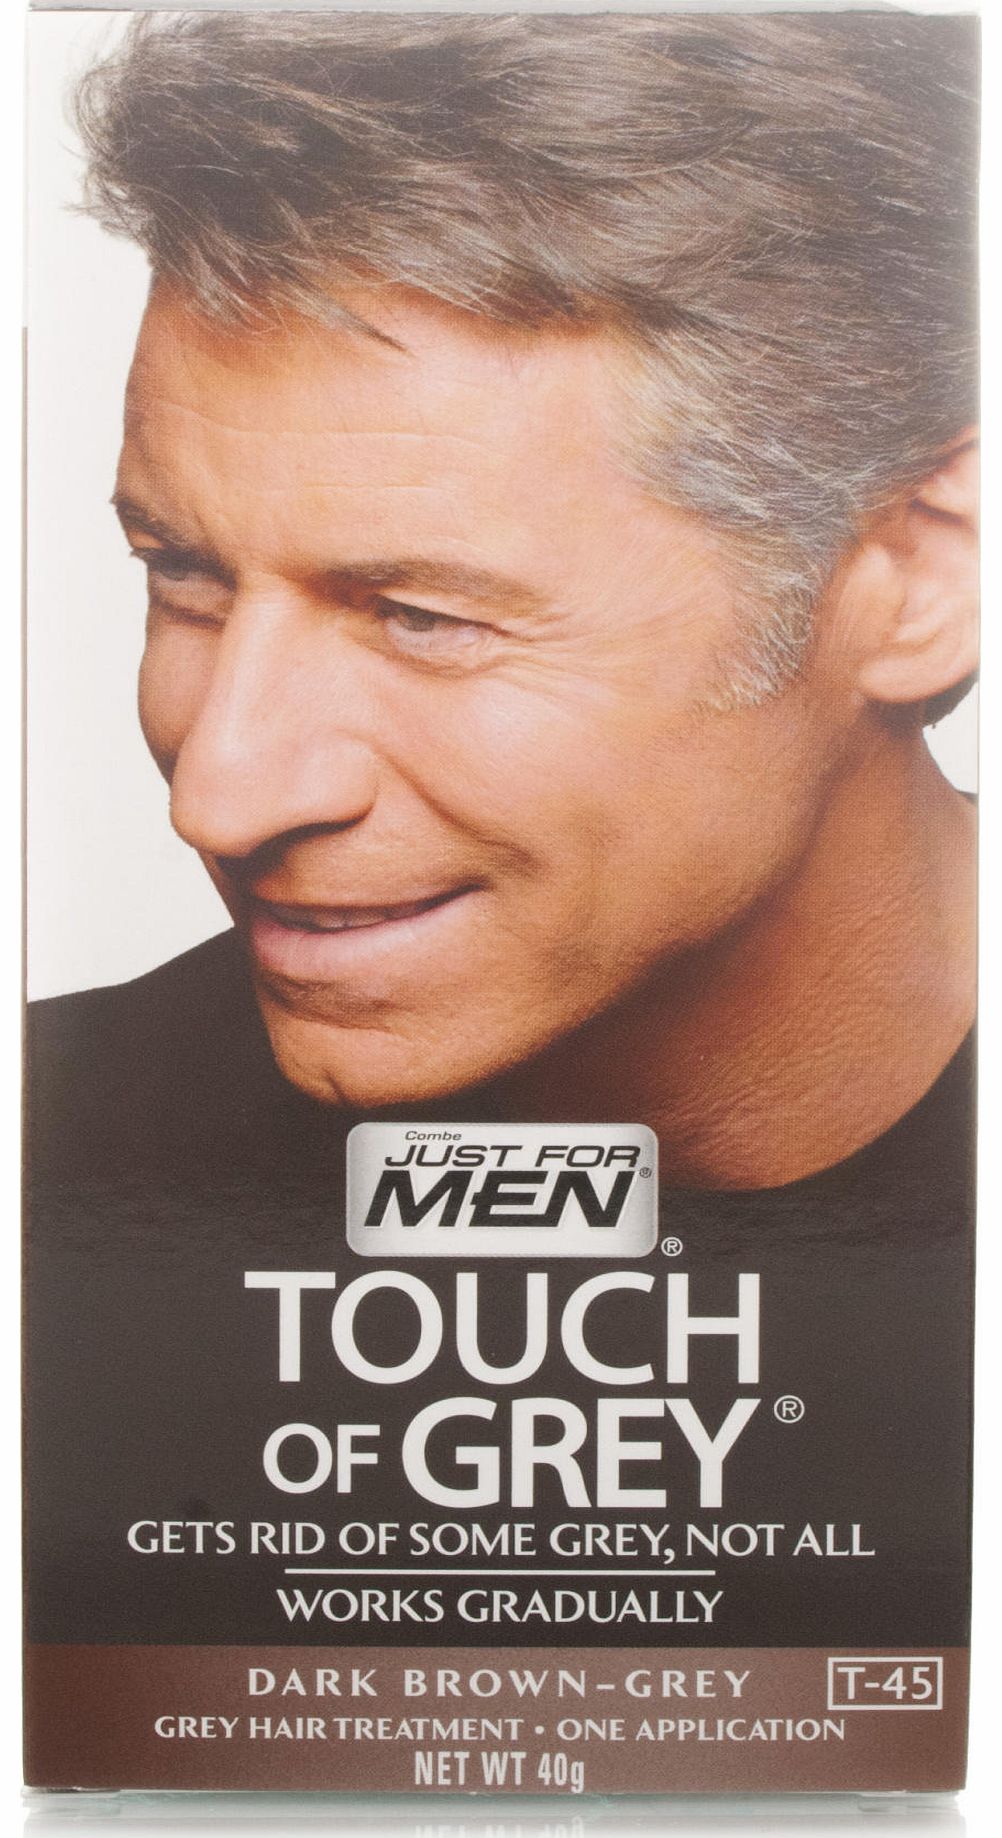 Just For Men Touch of Grey - Dark Brown-Grey